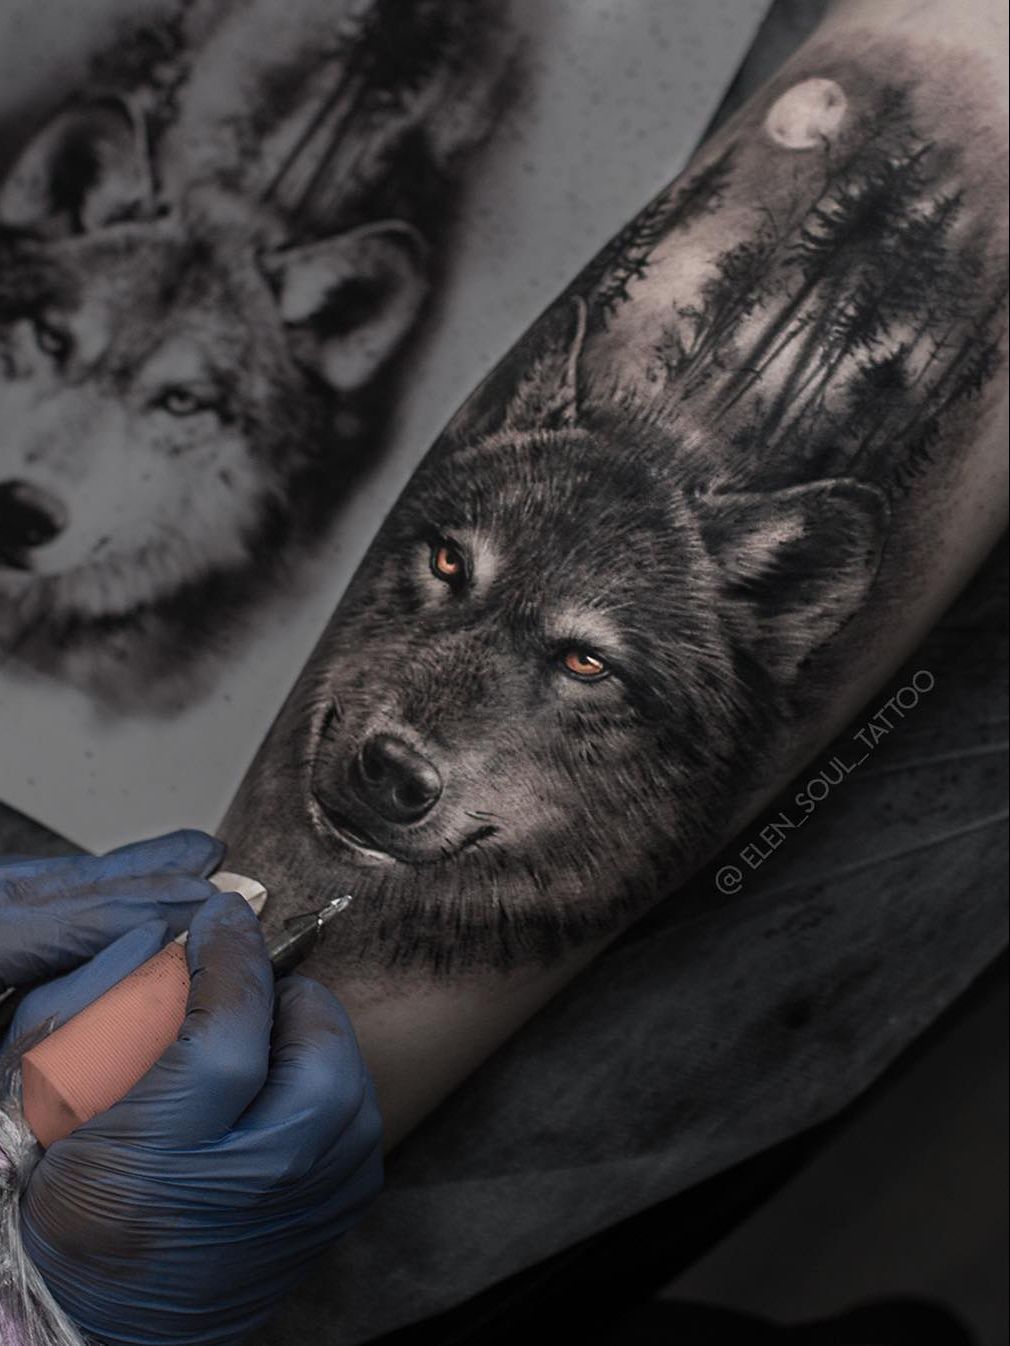 tattoo of close up portrait photo of an angry wolf | Stable Diffusion